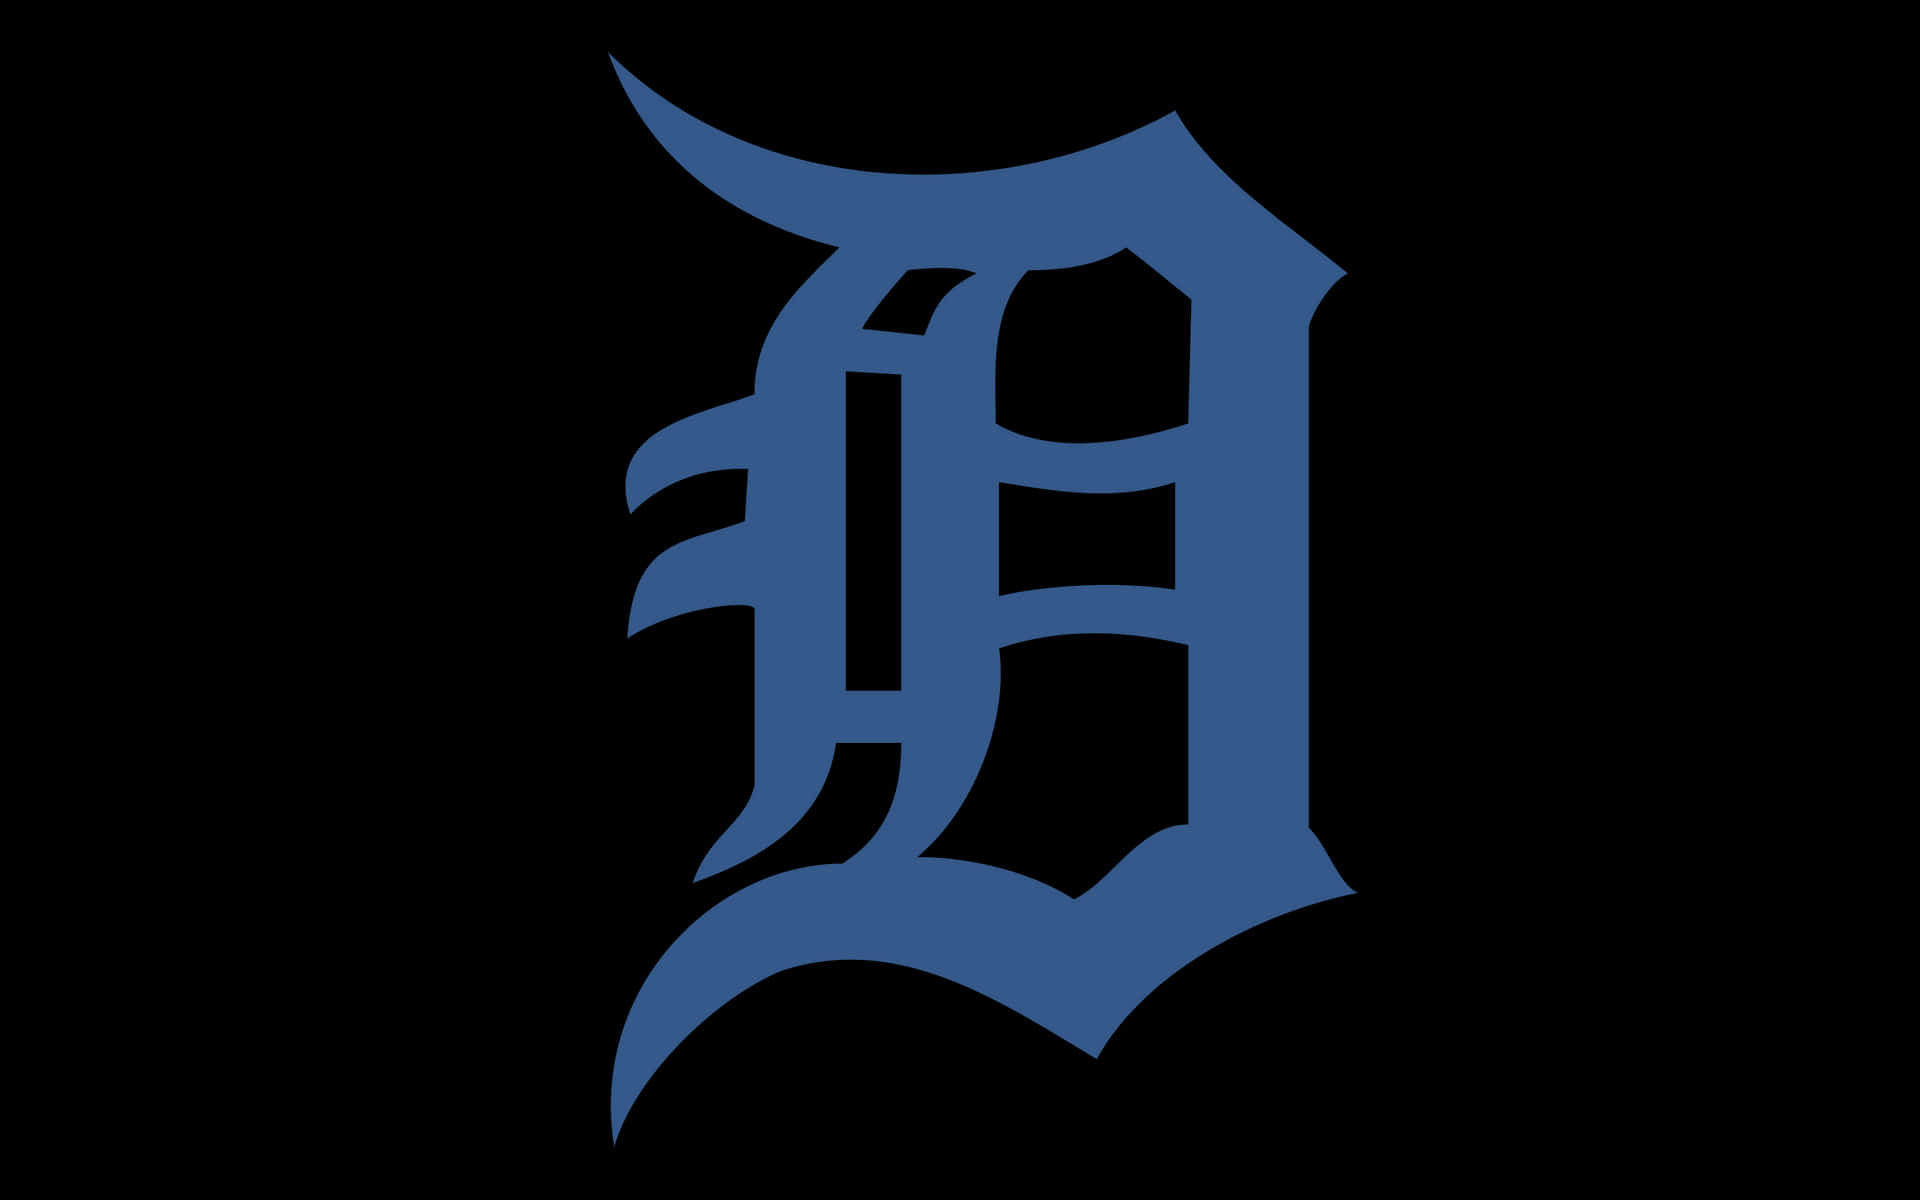 Detroit Tigers sign Keston Hiura Detroit Tigers Acquire T.J. Hopkins Detroit Tigers Opening Day Starting Lineup Andre Lipcius Detroit Tigers Cut Detroit Tigers OF Riley Greene Detroit Tigers P Tyler Mattison Detroit Tigers Pitching Rotation Detroit Tigers injury Report Andy Ibanez Detroit Tigers Activate Shelby Miller